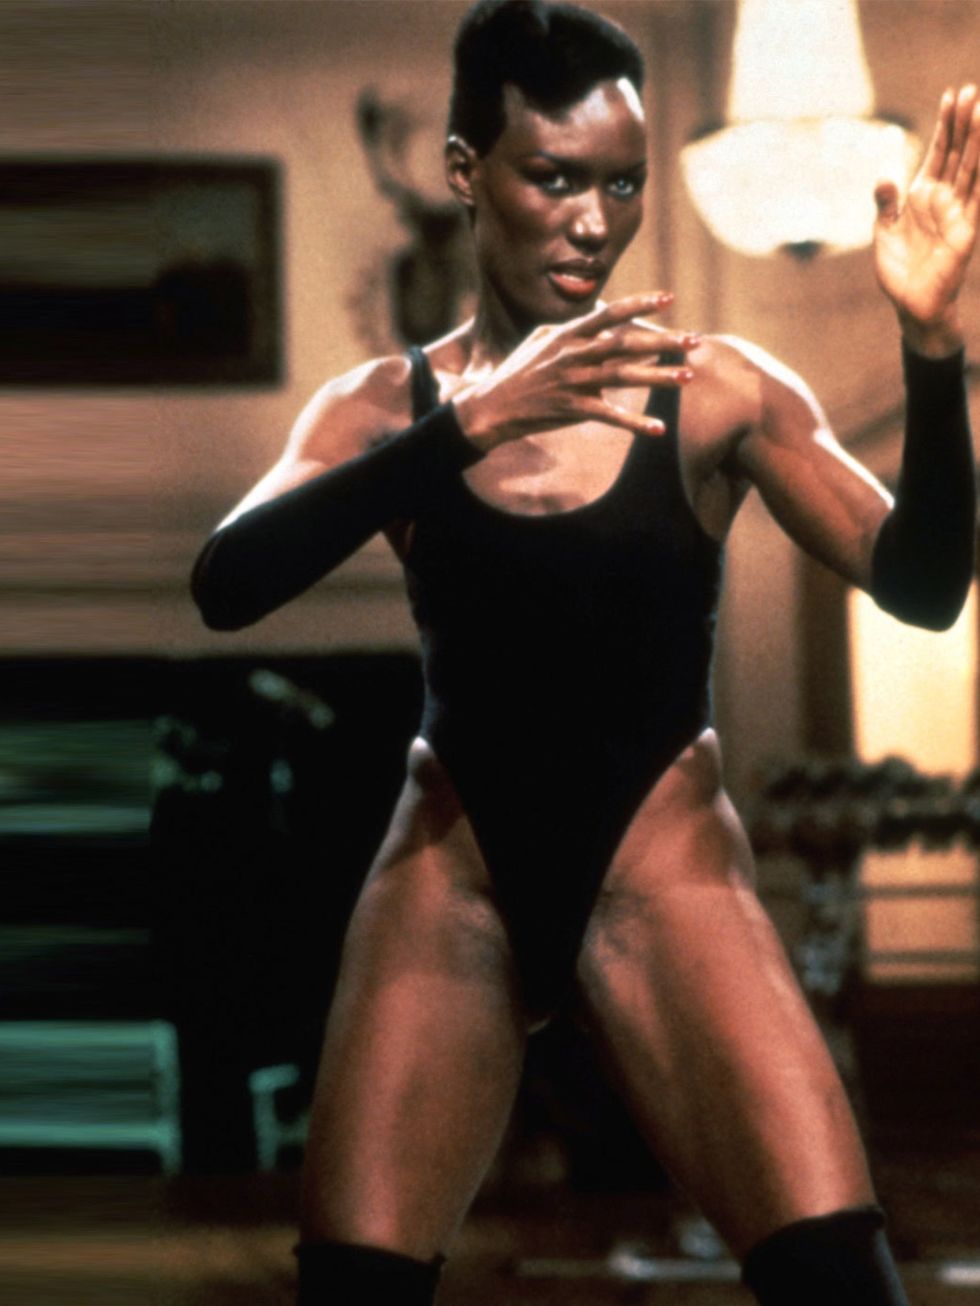 <p><strong>Bond Girl:</strong> Mayday (Grace Jones)</p><p><strong>James Bond Film:</strong> A View to a Kill</p><p><strong>Exercise Tip:</strong> Try this ramped-up version of a plank, it wont just work your back but all your core muscles says Tim. </p